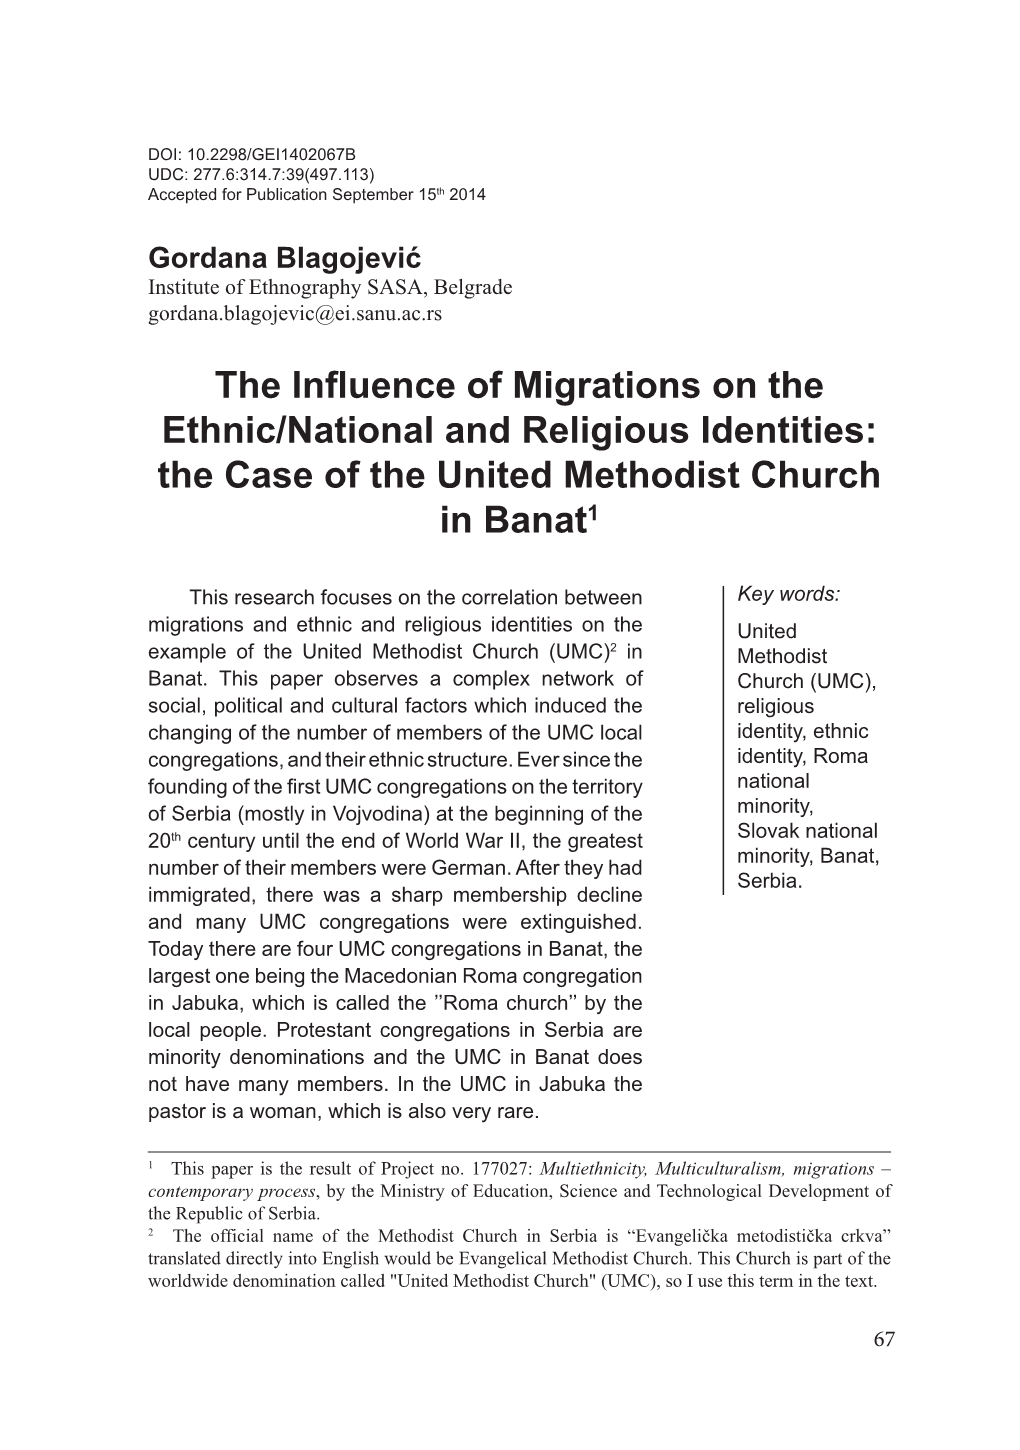 The Influence of Migrations on the Ethnic/National and Religious Identities: the Case of the United Methodist Church in Banat1